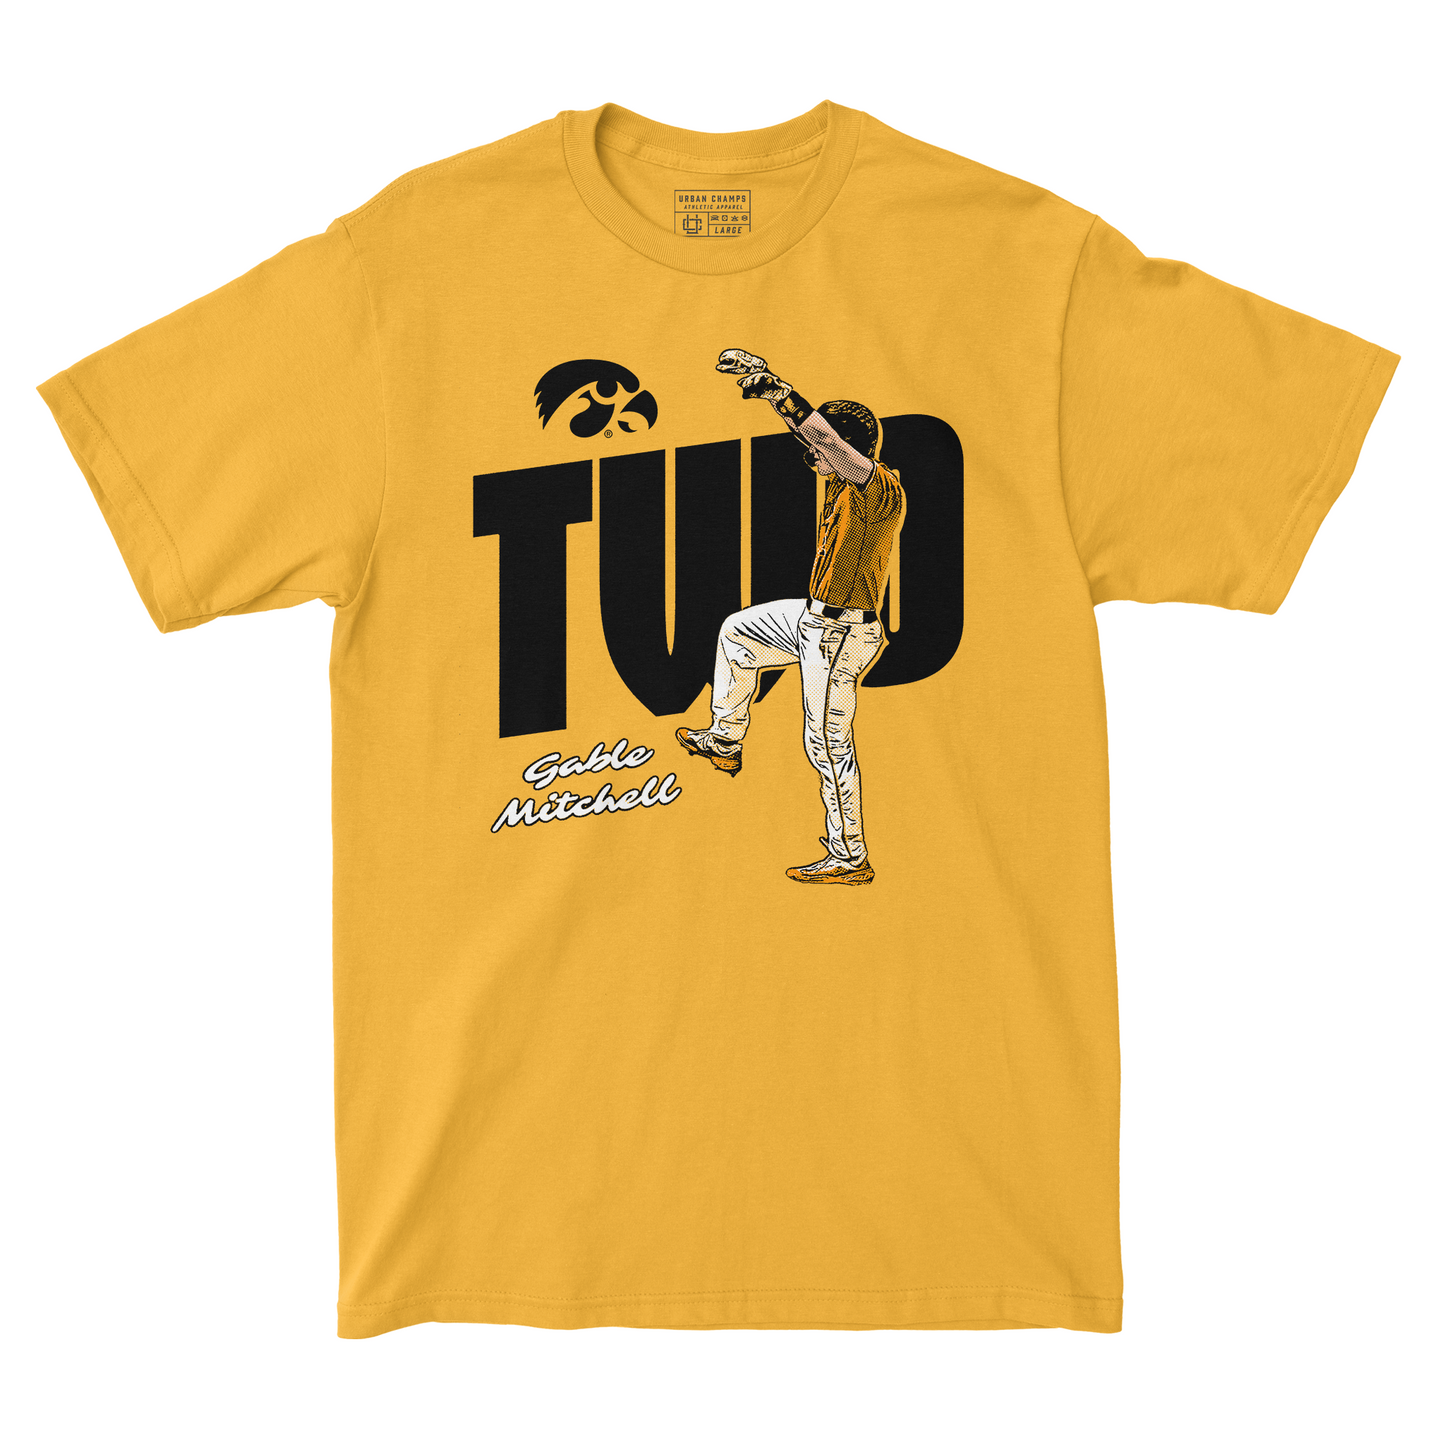 EXCLUSIVE RELEASE: Gable Mitchell 'TWO' Tee